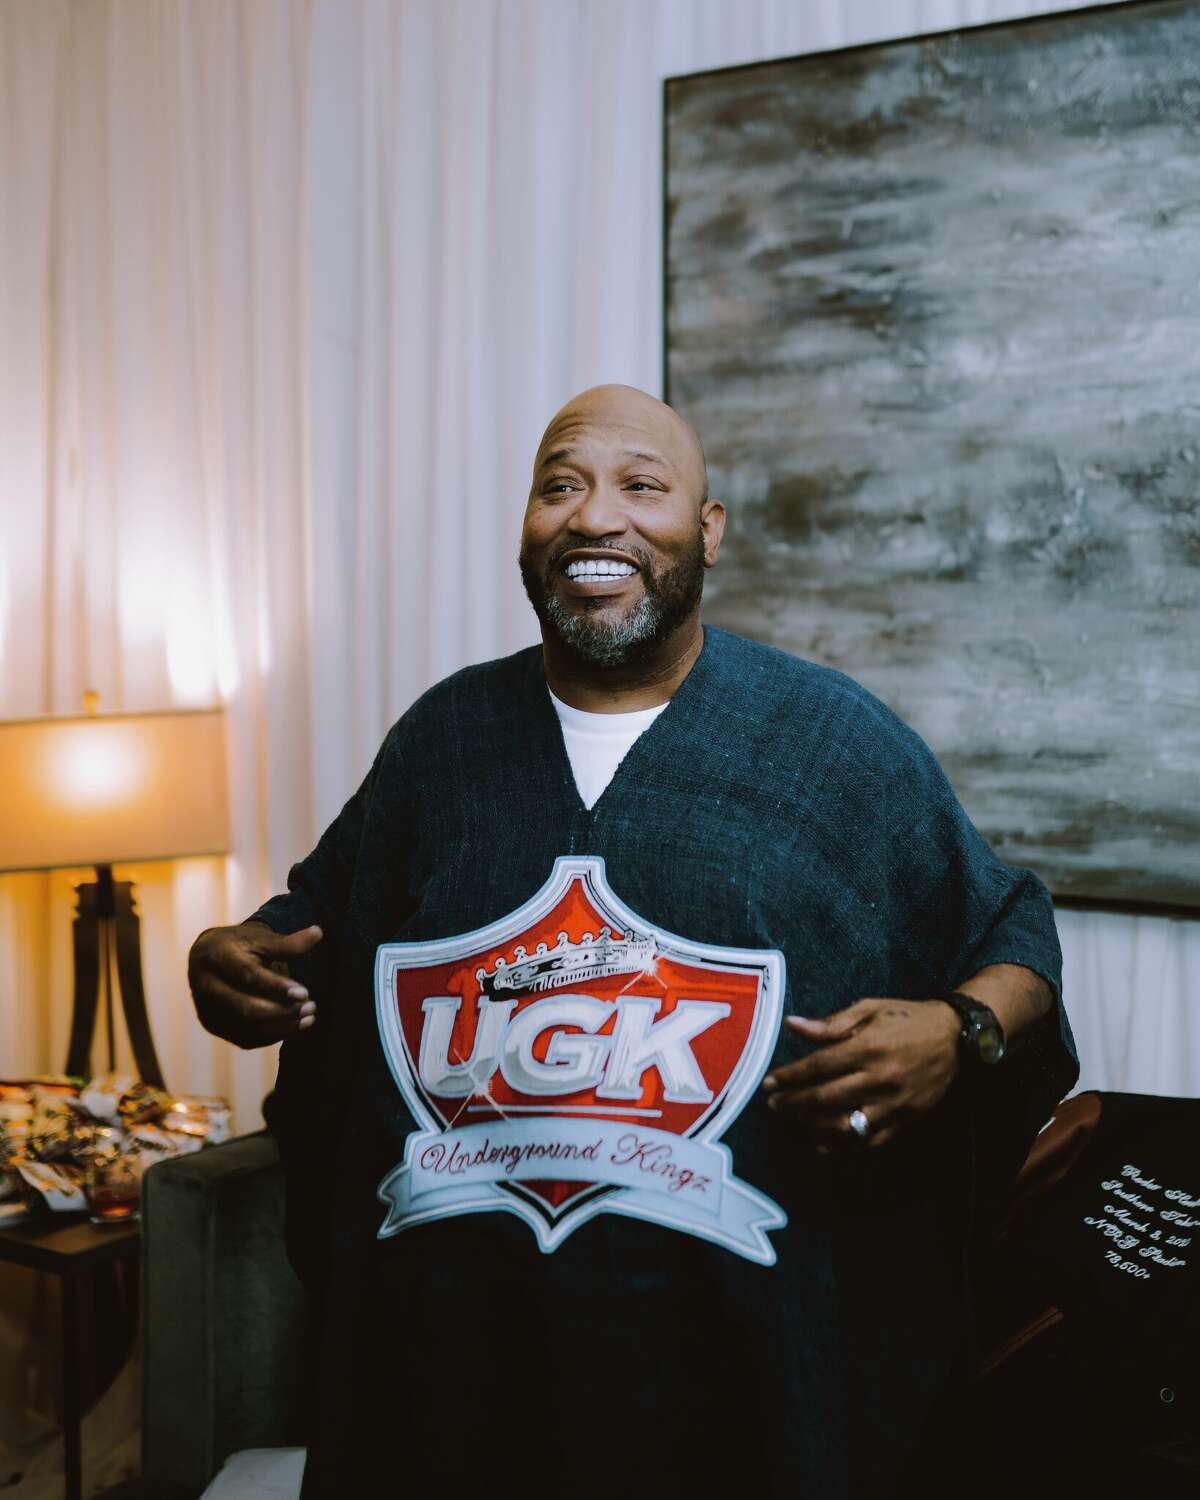 Bun B's custom UGK Poncho was created by Purple for the Rodeo show.